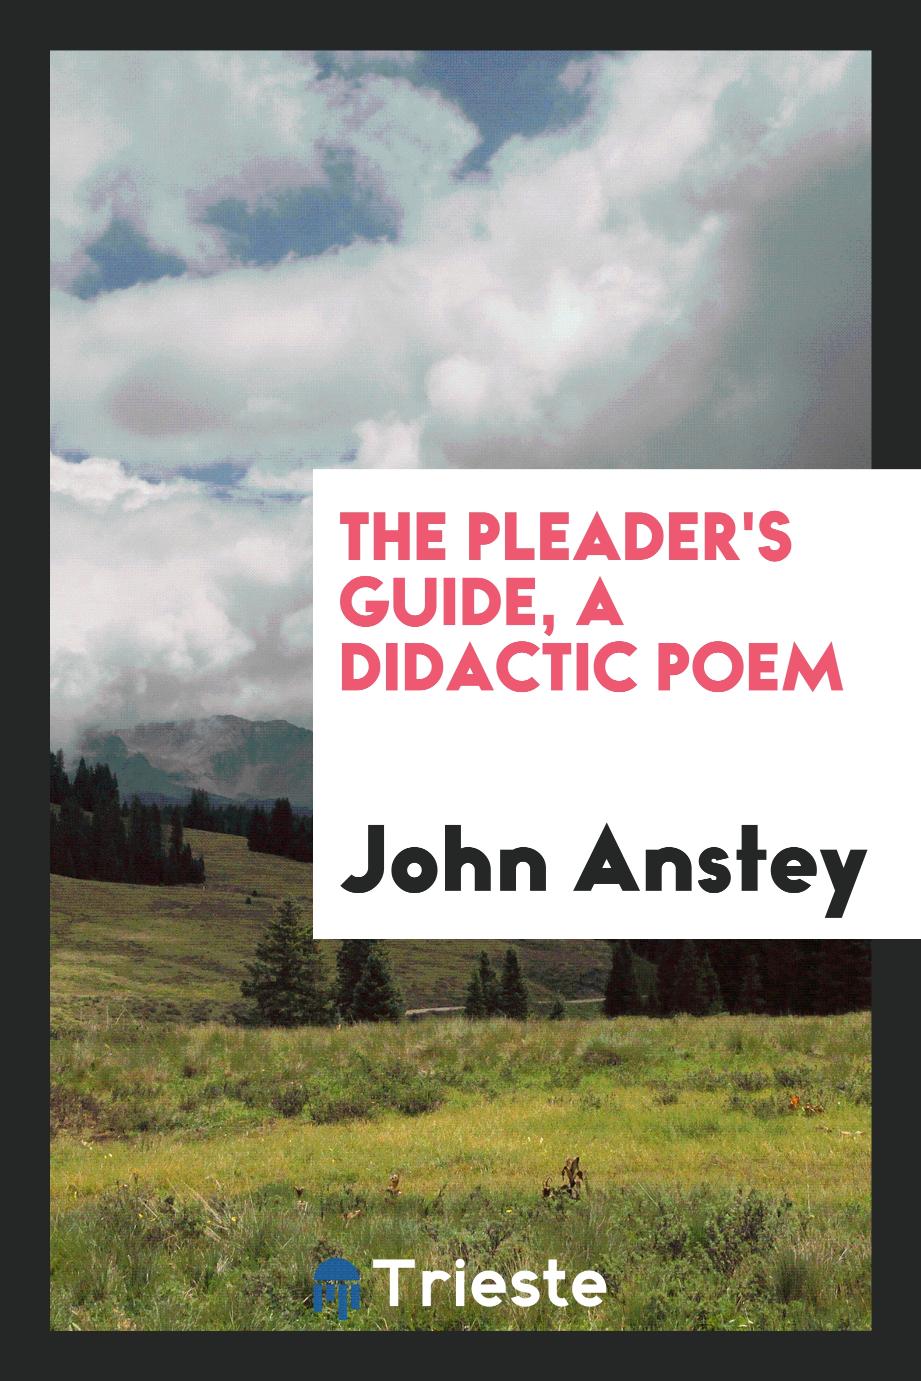 The Pleader's guide, a didactic poem